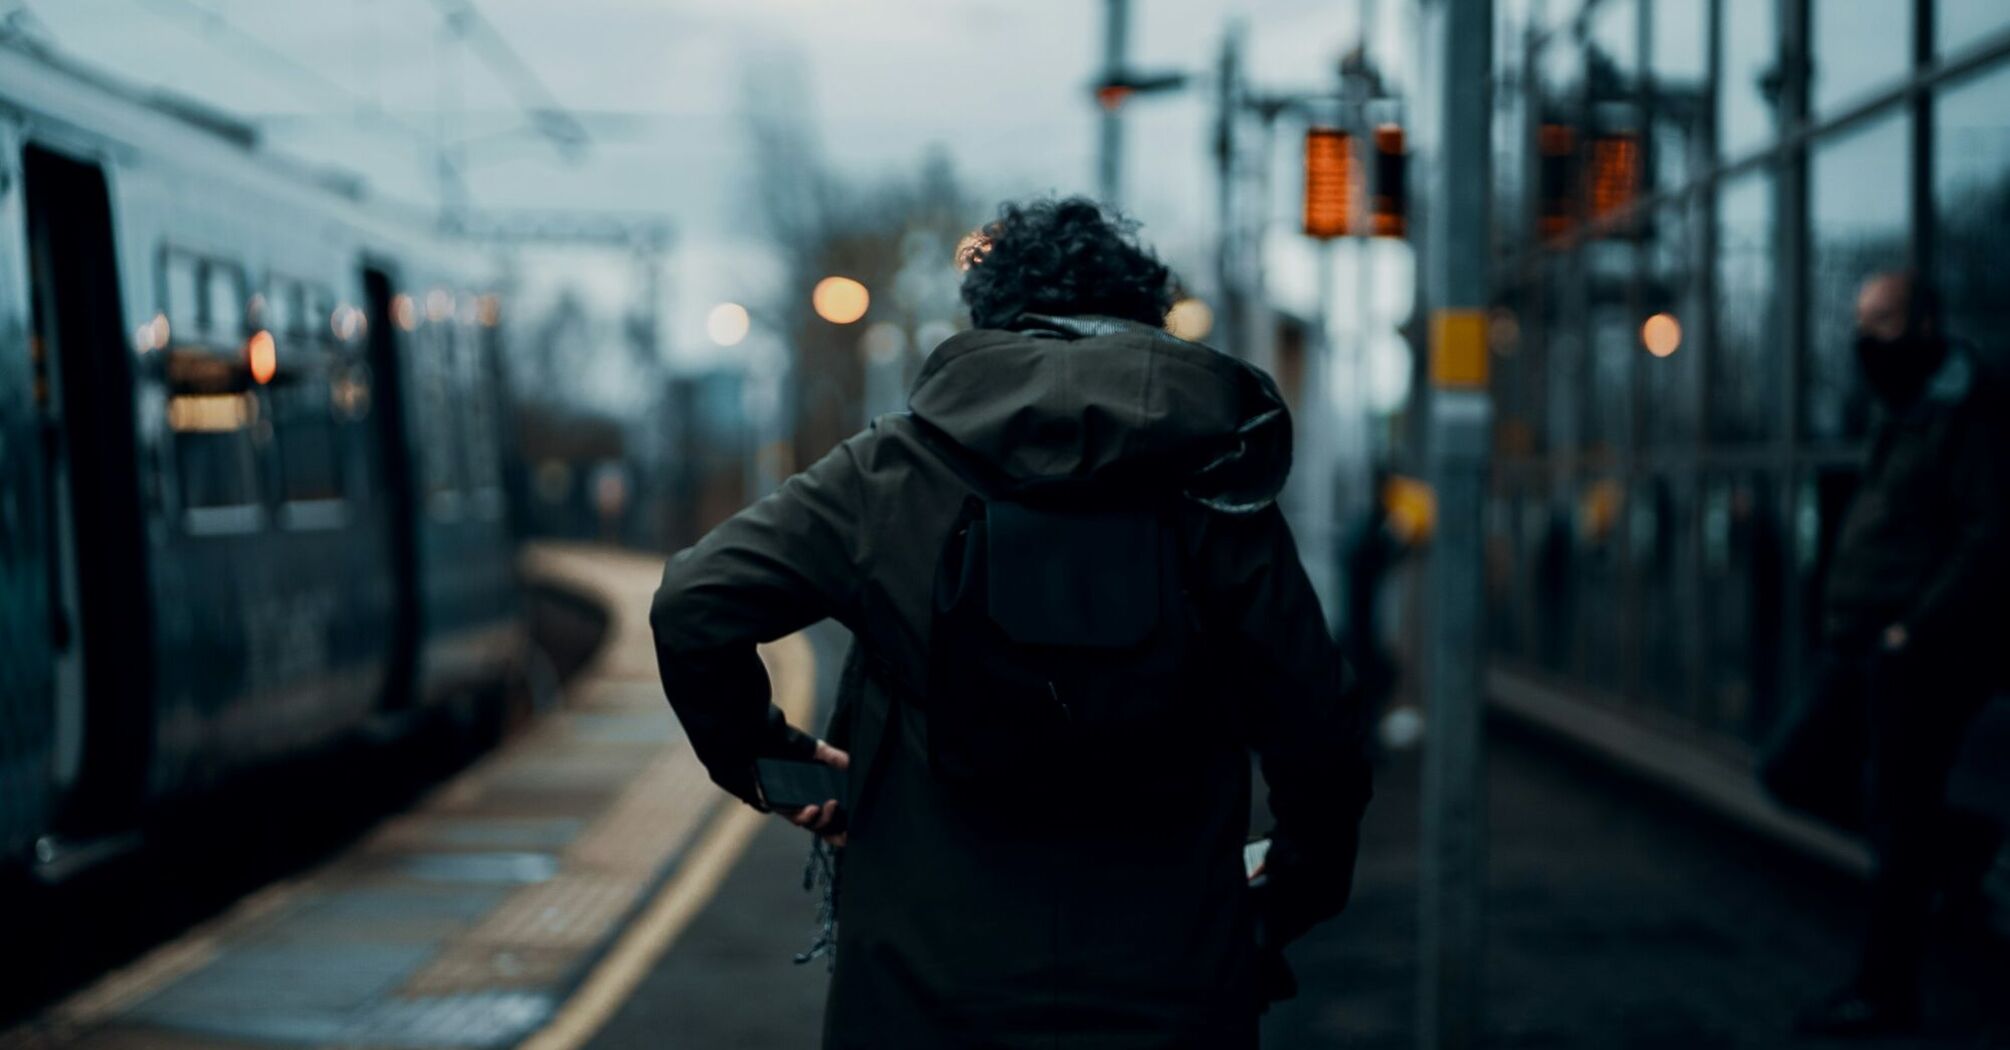 A person waiting on the platform at station with a train in the background